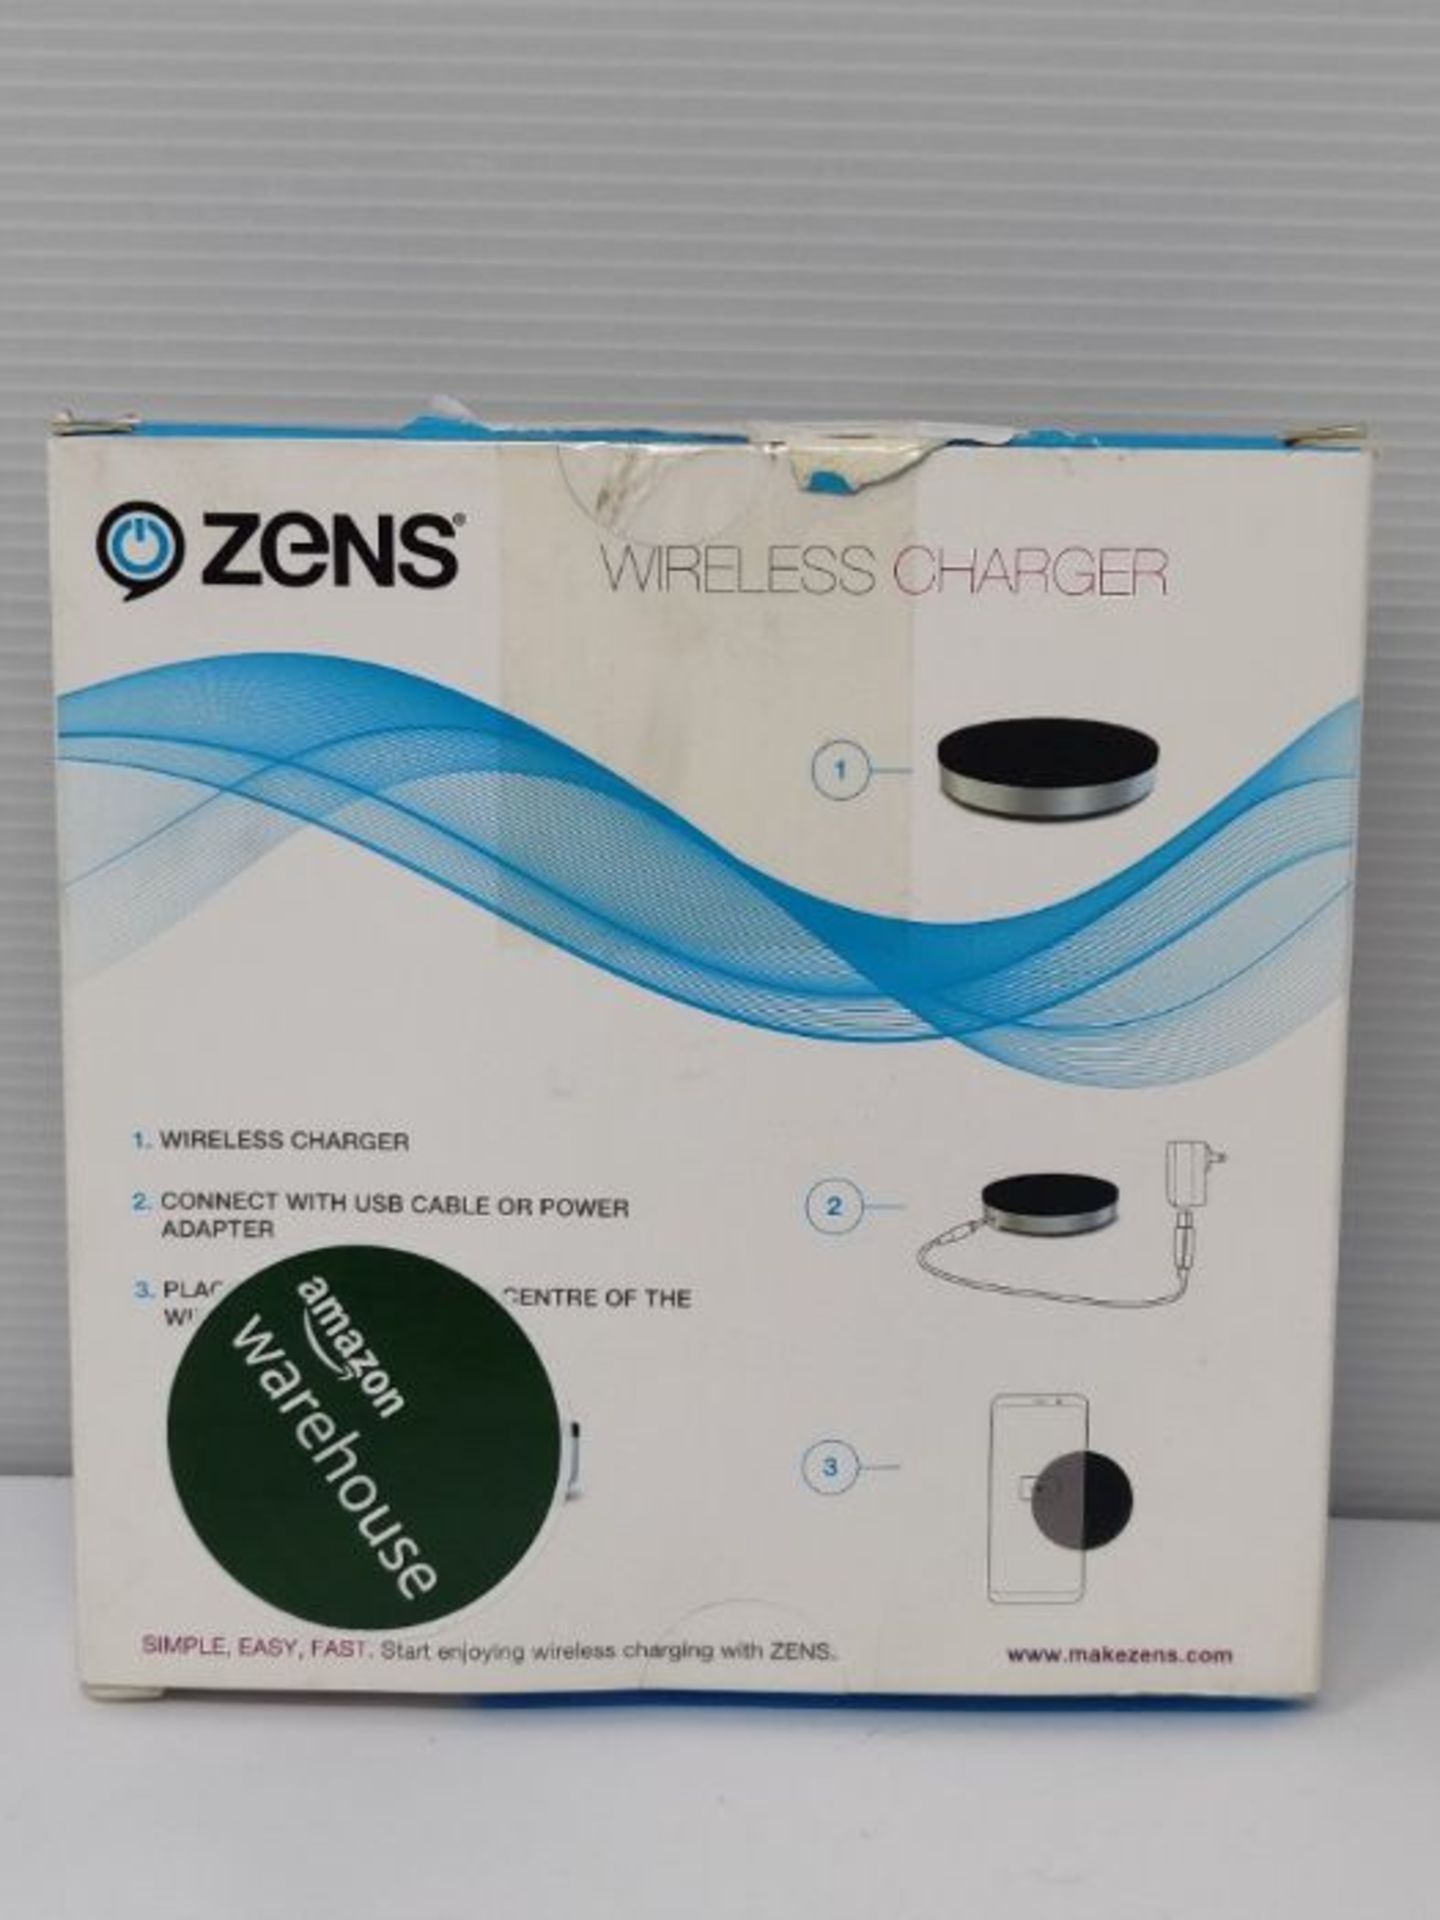 ZENS Qi-certified Single Wireless Charger Round 5W Output Black, USB Cable Included - - Image 2 of 3